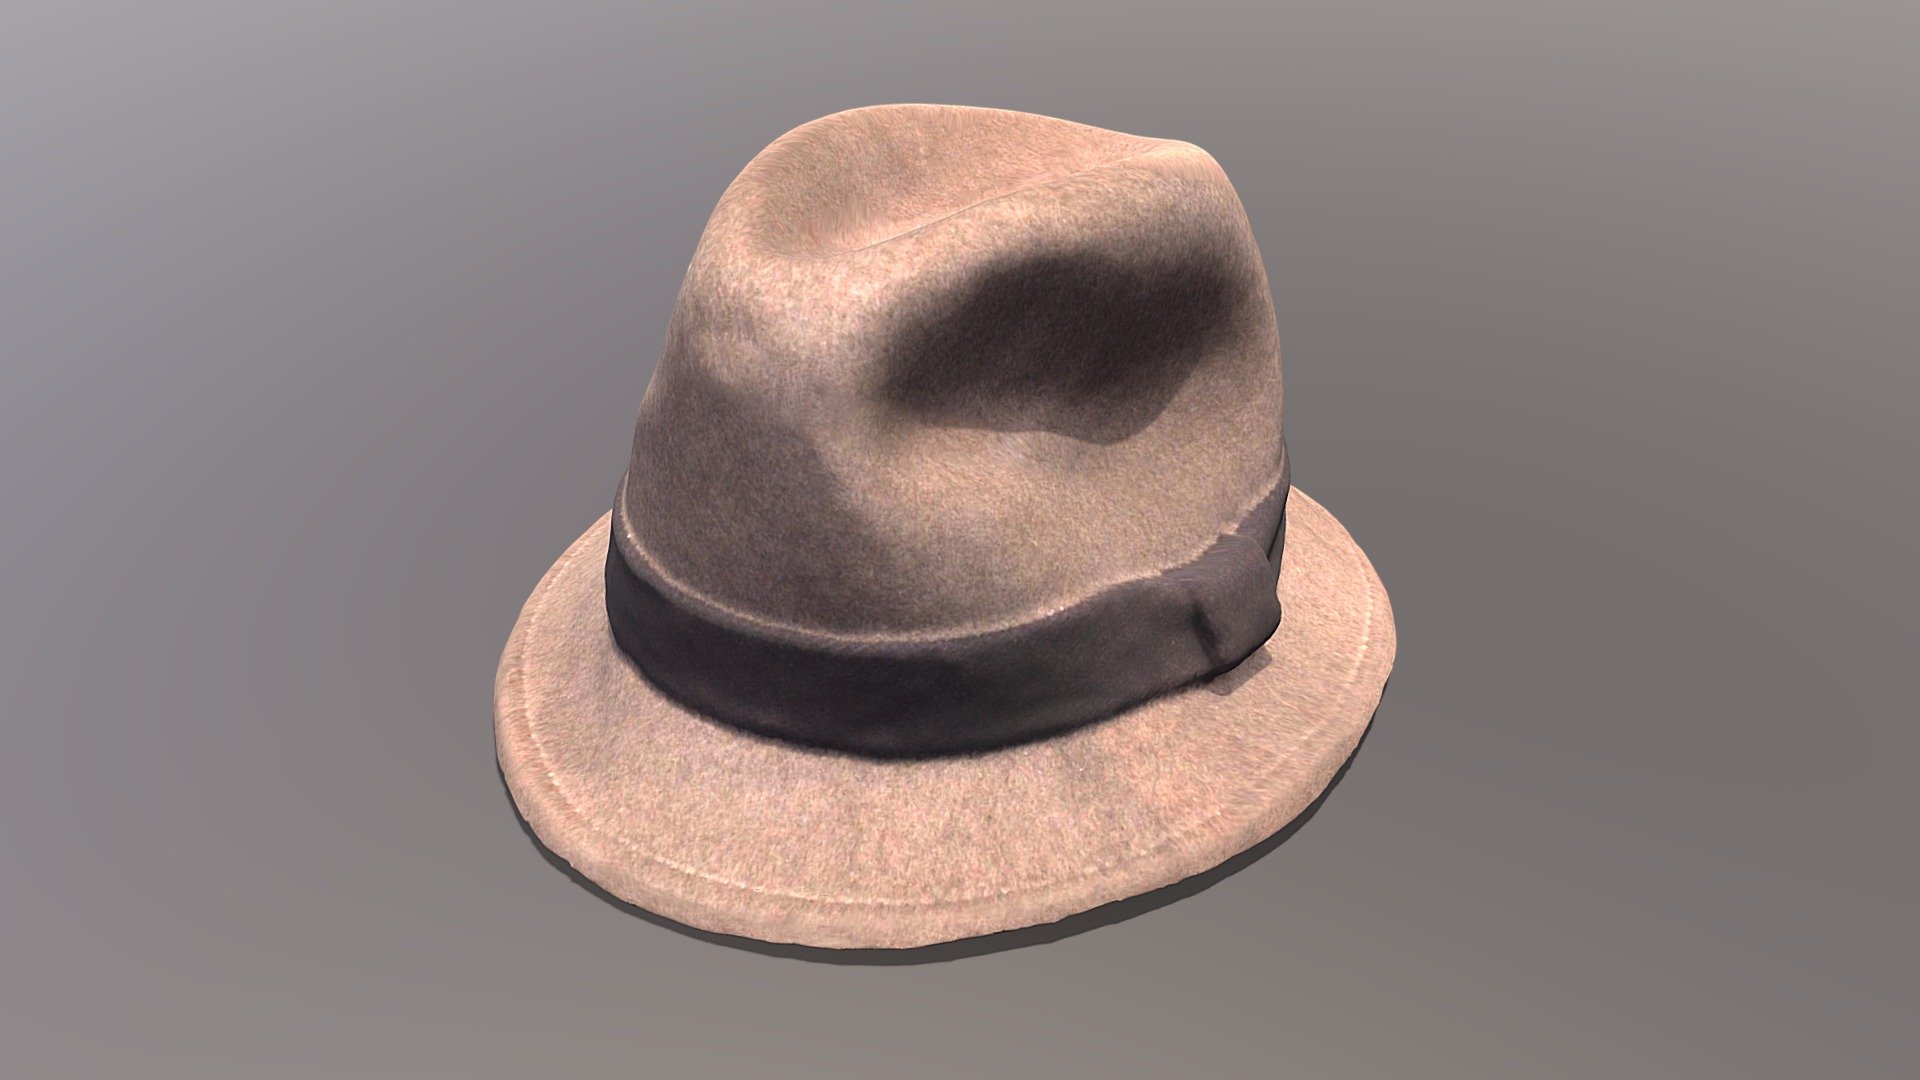 A scan of a type of hat. It is light brown and has a dark band around the crown for added decoration. A stylish adornment for anyone's head 3d model